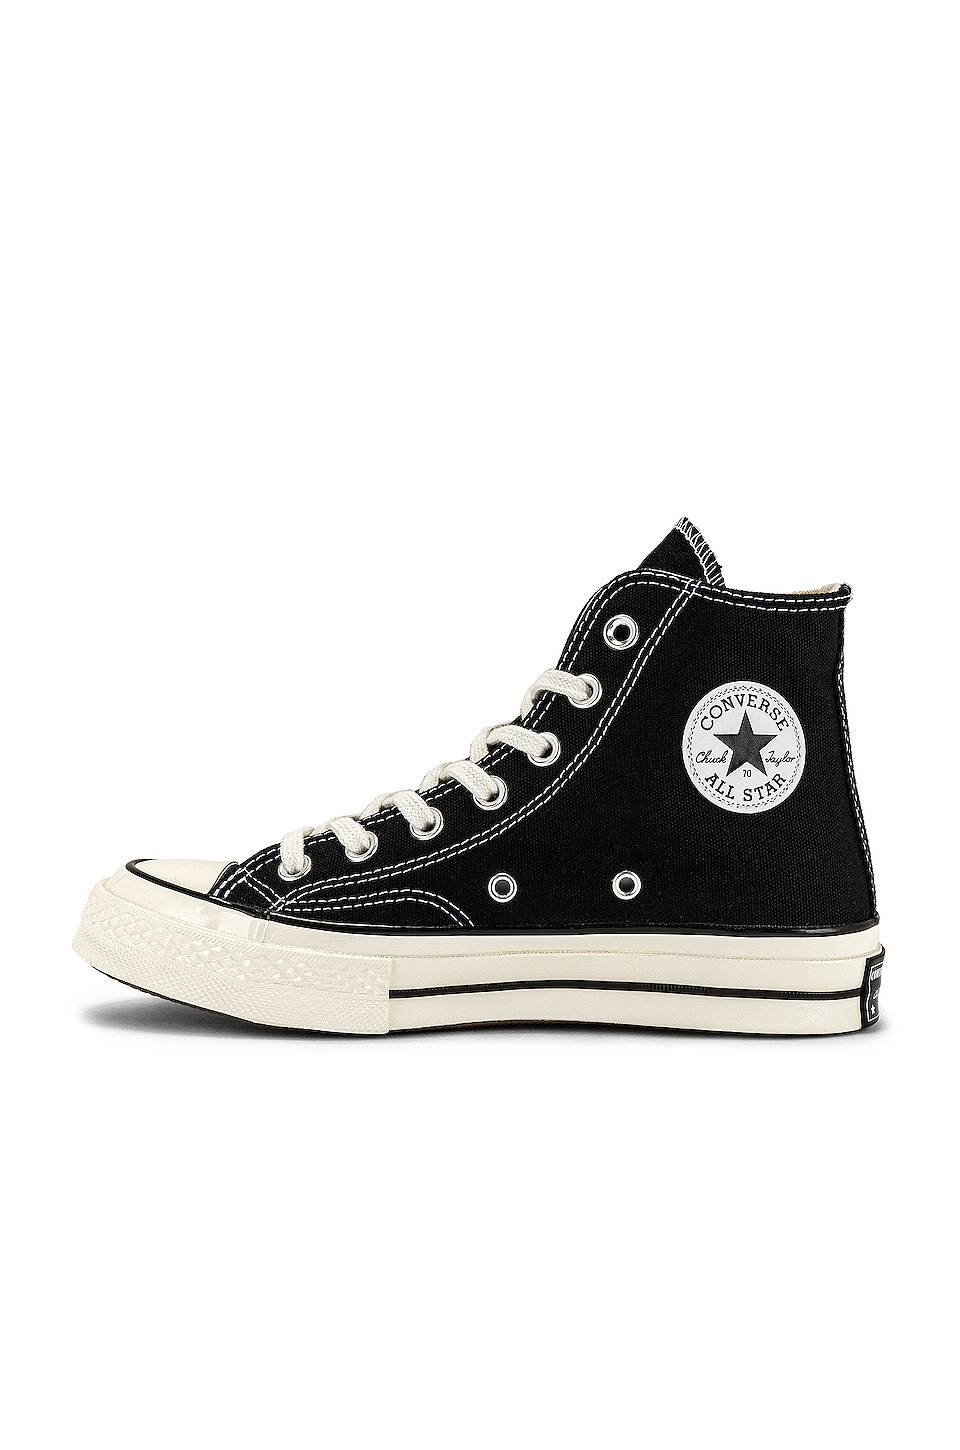 CONVERSE CHUCK 70 ALL STAR HI - ALL TIME TRENDY SNEAKERS FOR WOMEN